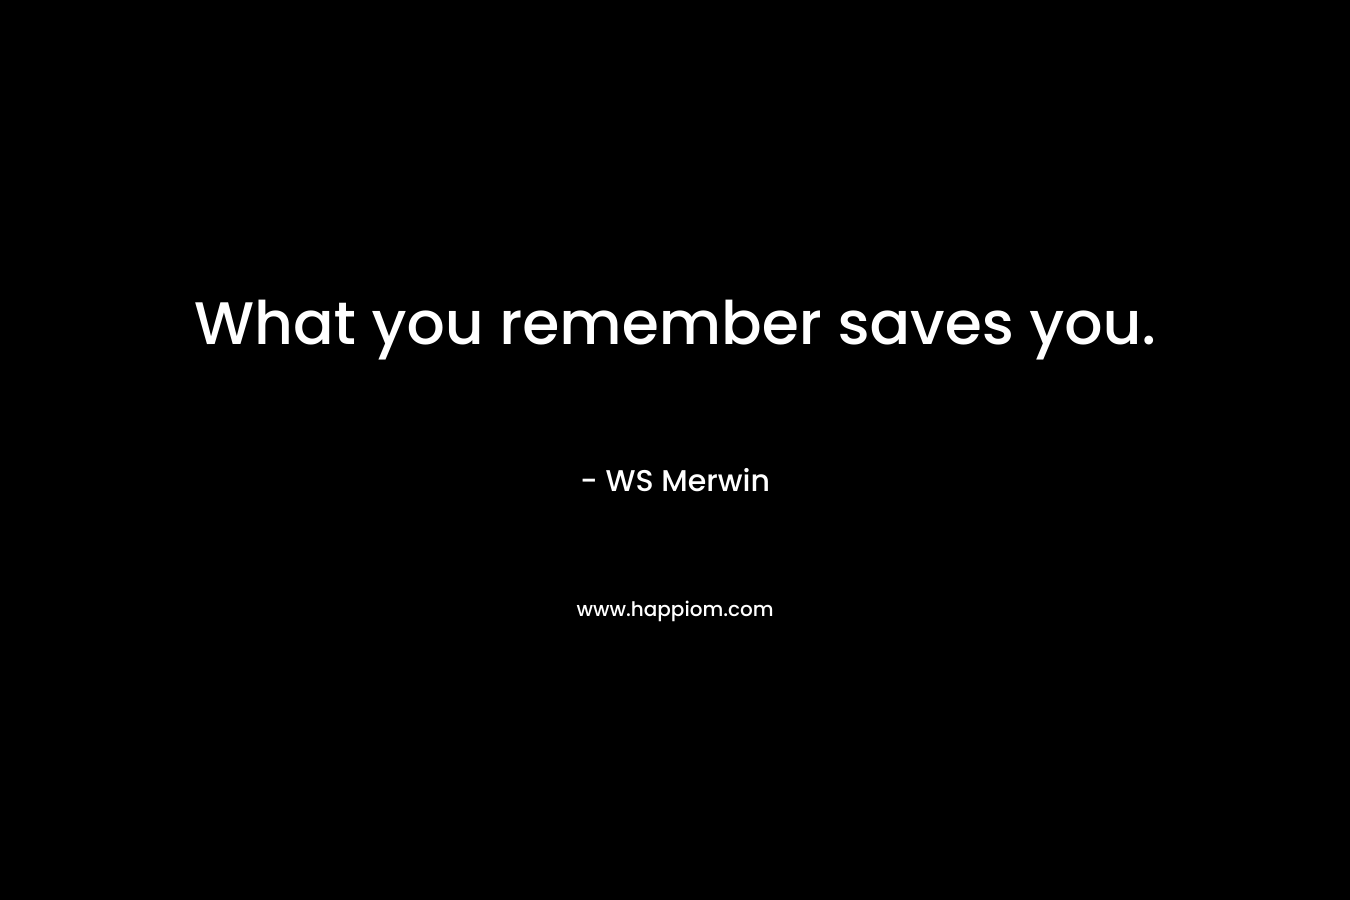 What you remember saves you. – WS Merwin